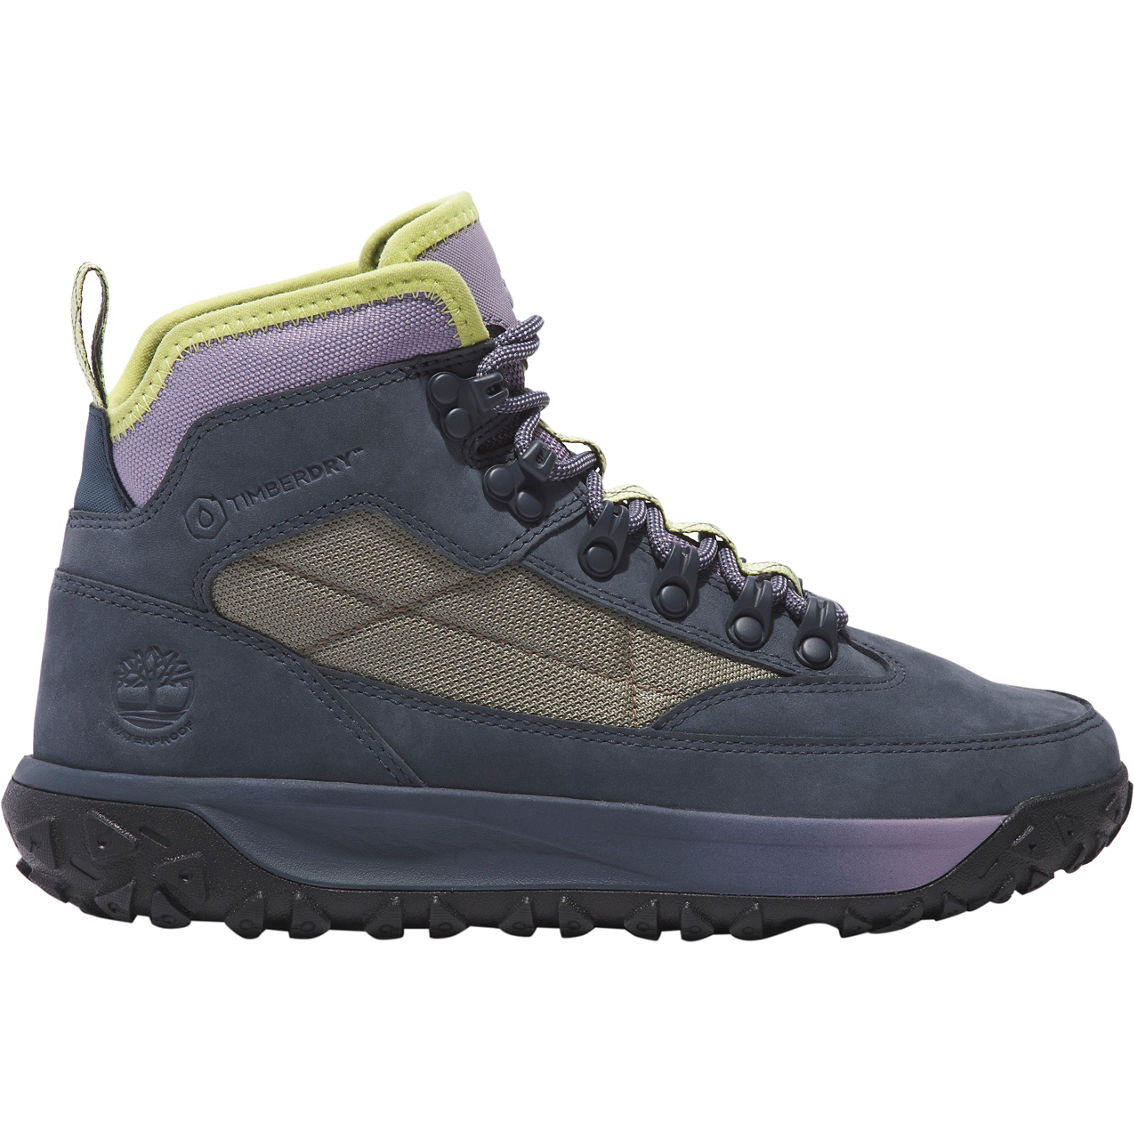 Timberland Women's GreenStride Motion 6 Waterproof Hiking Boots - Image 2 of 5